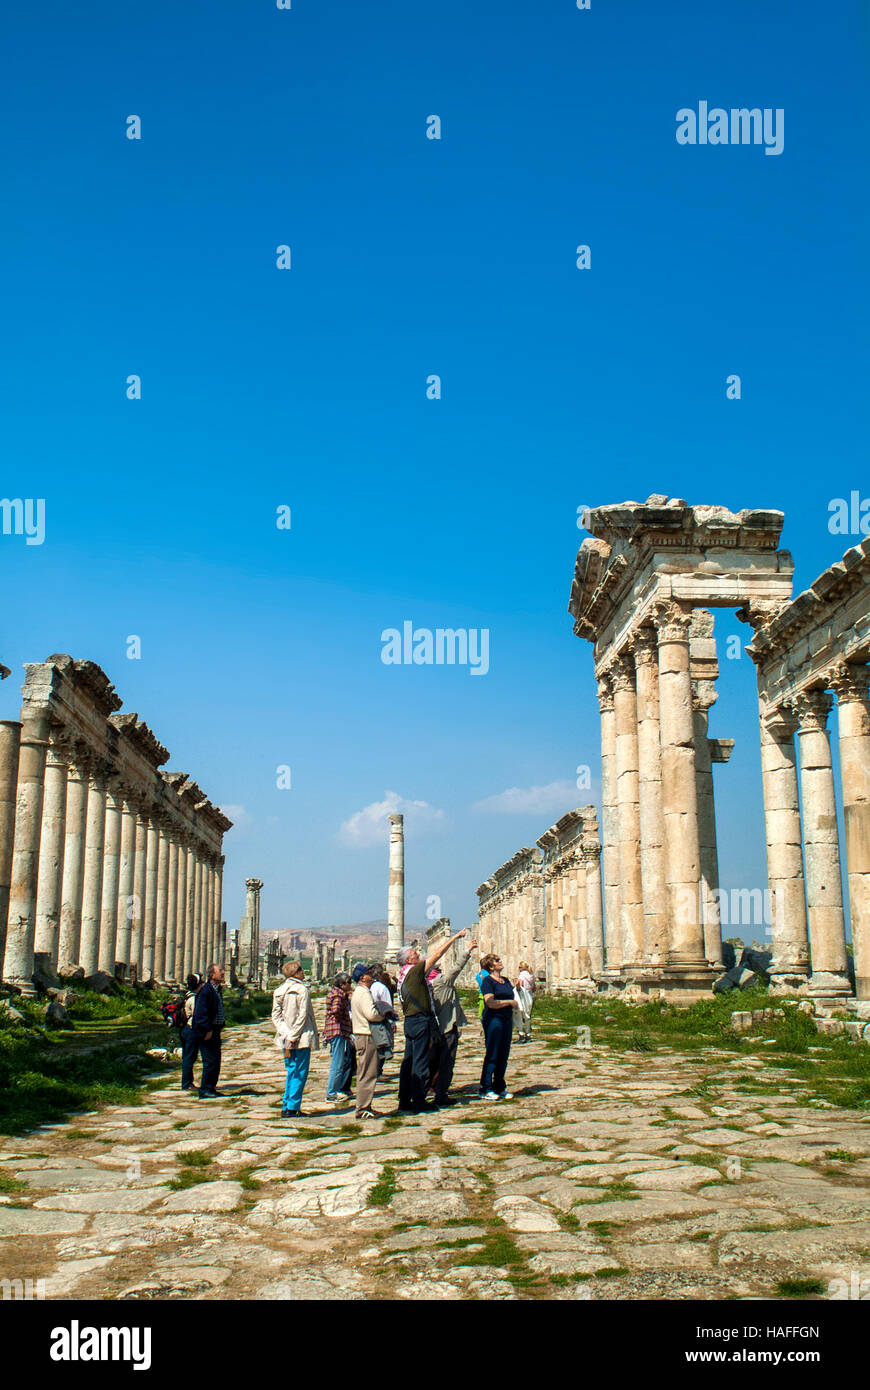 The Great Colonnade, built by the Romans in the 2nd century AD, at the ancient city of Apamea near Hama in Syria. Stock Photo